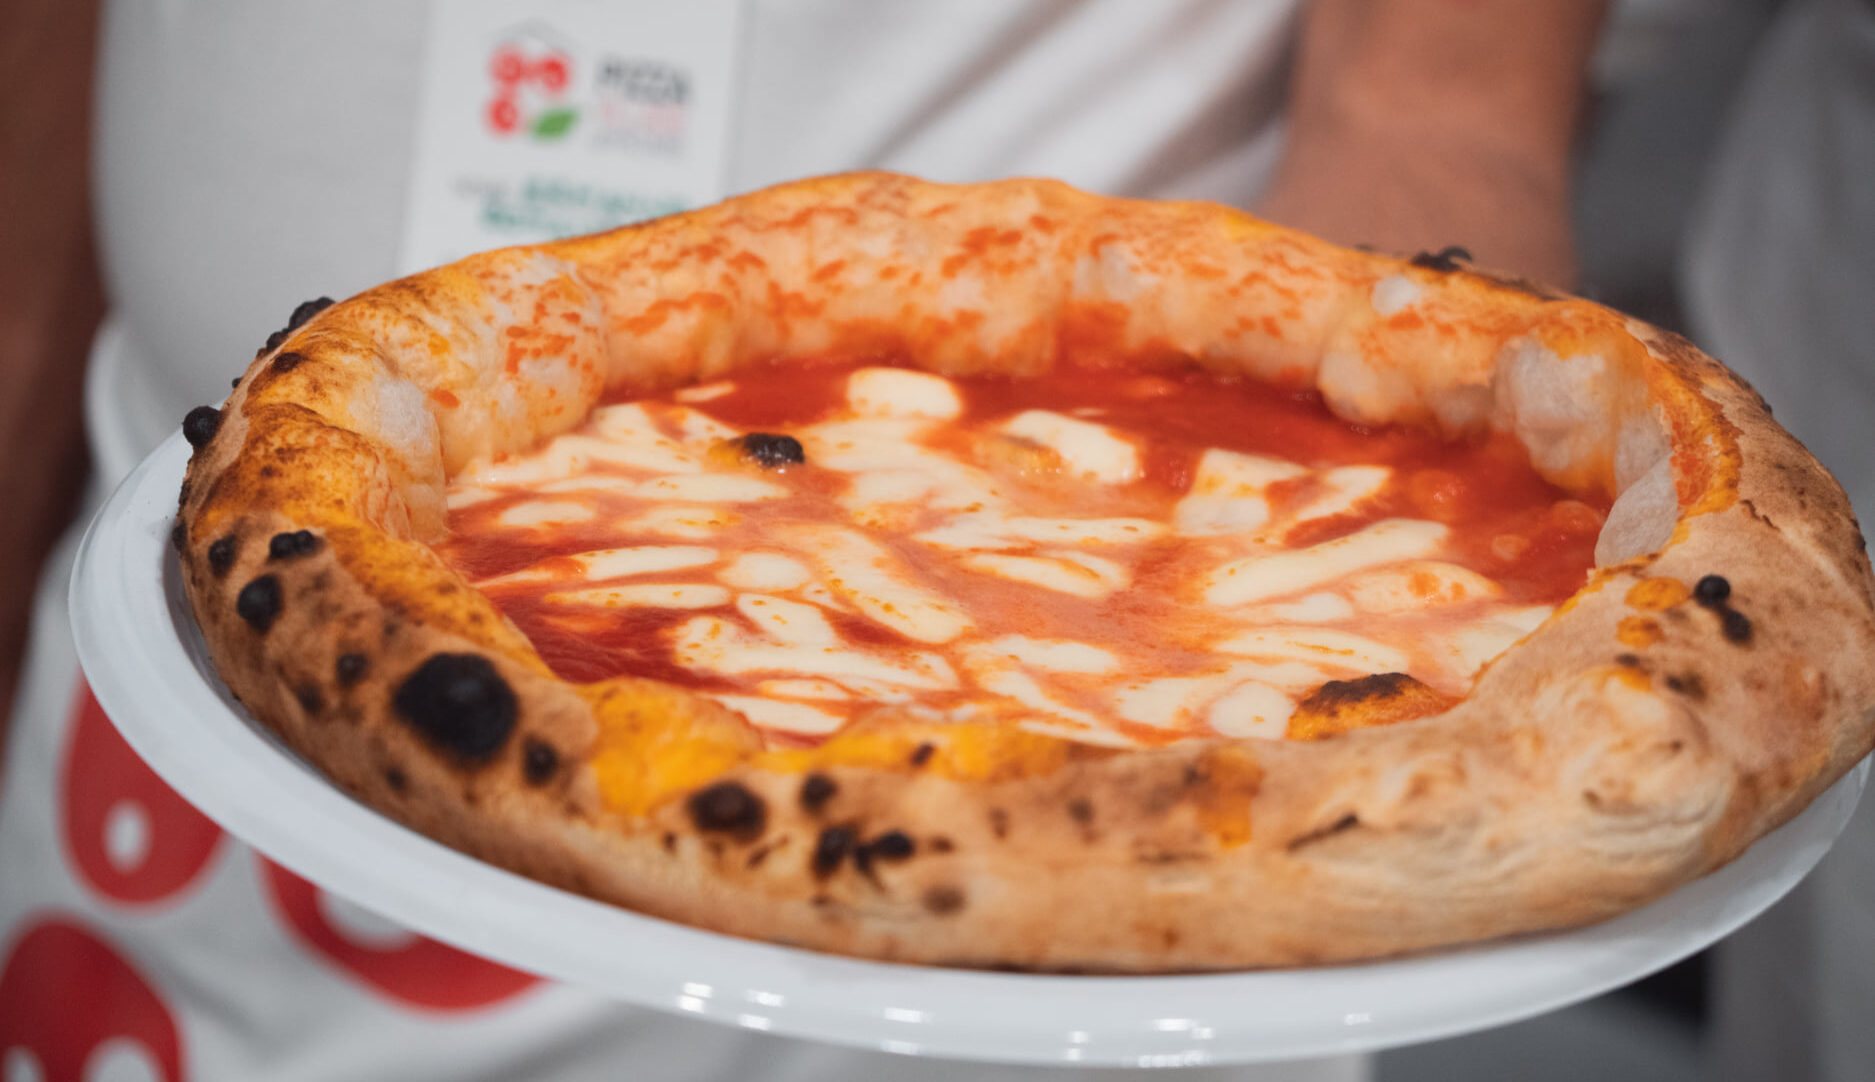 The World Pizza Championship begins at Napoli Pizza Village the best